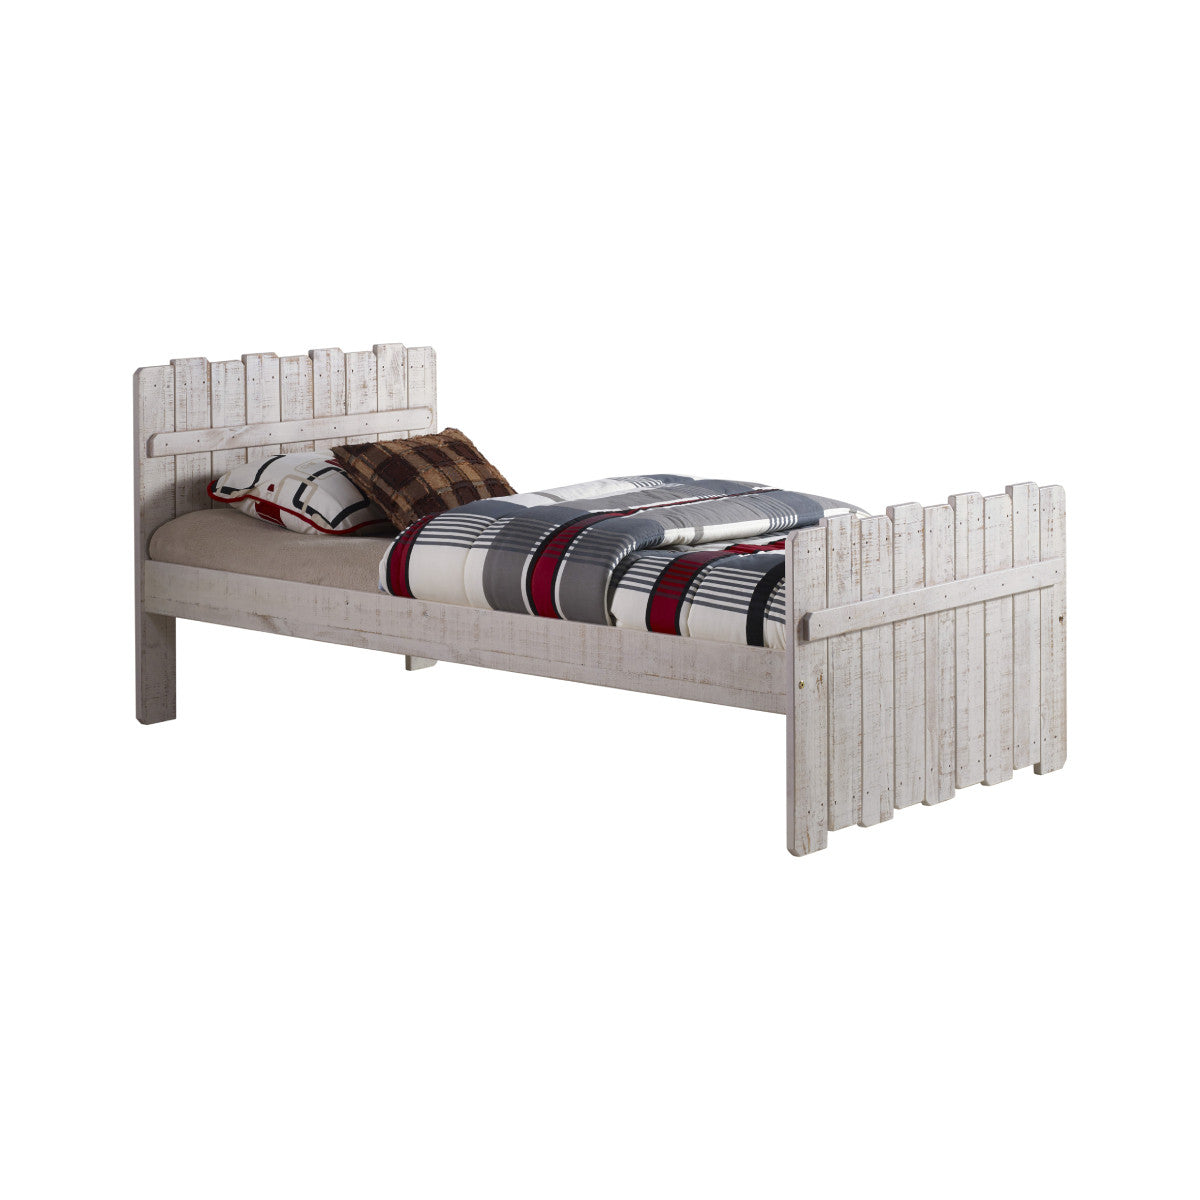 TWIN TREE HOUSE BED RUSTIC SAND